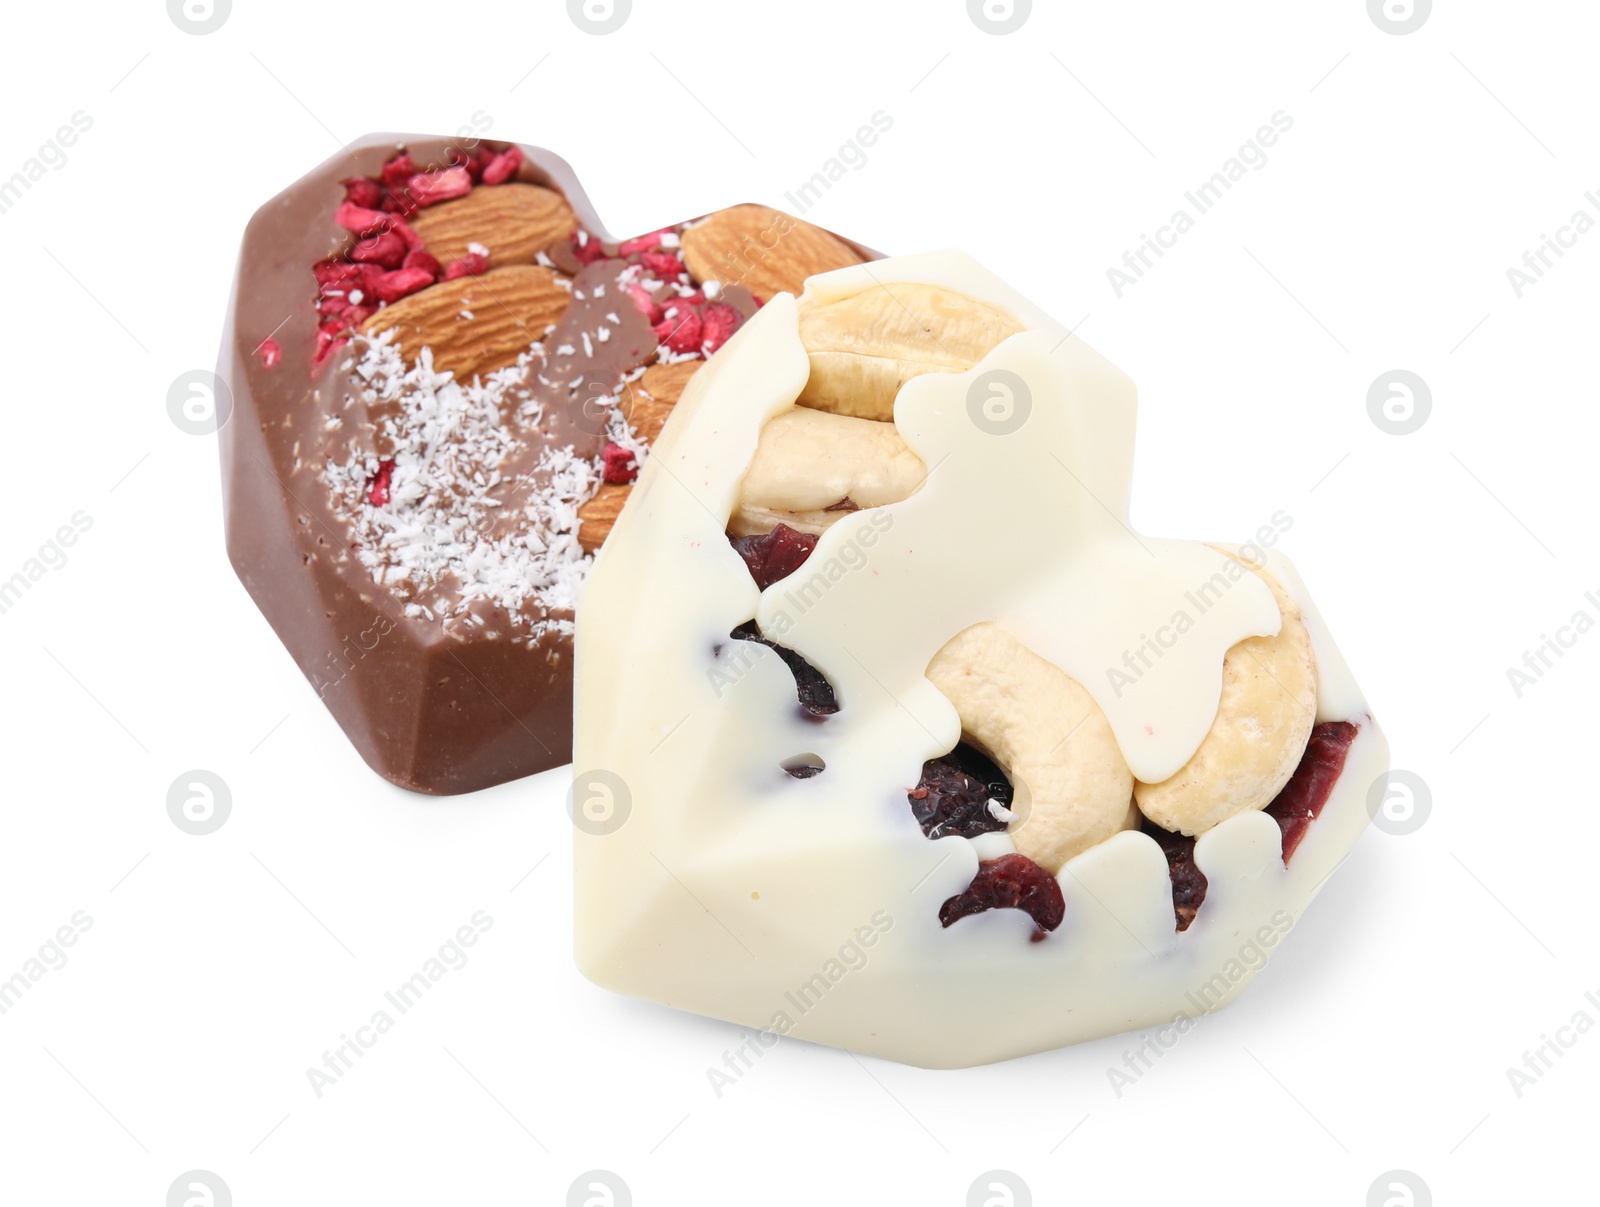 Photo of Tasty chocolate heart shaped candies with nuts on white background